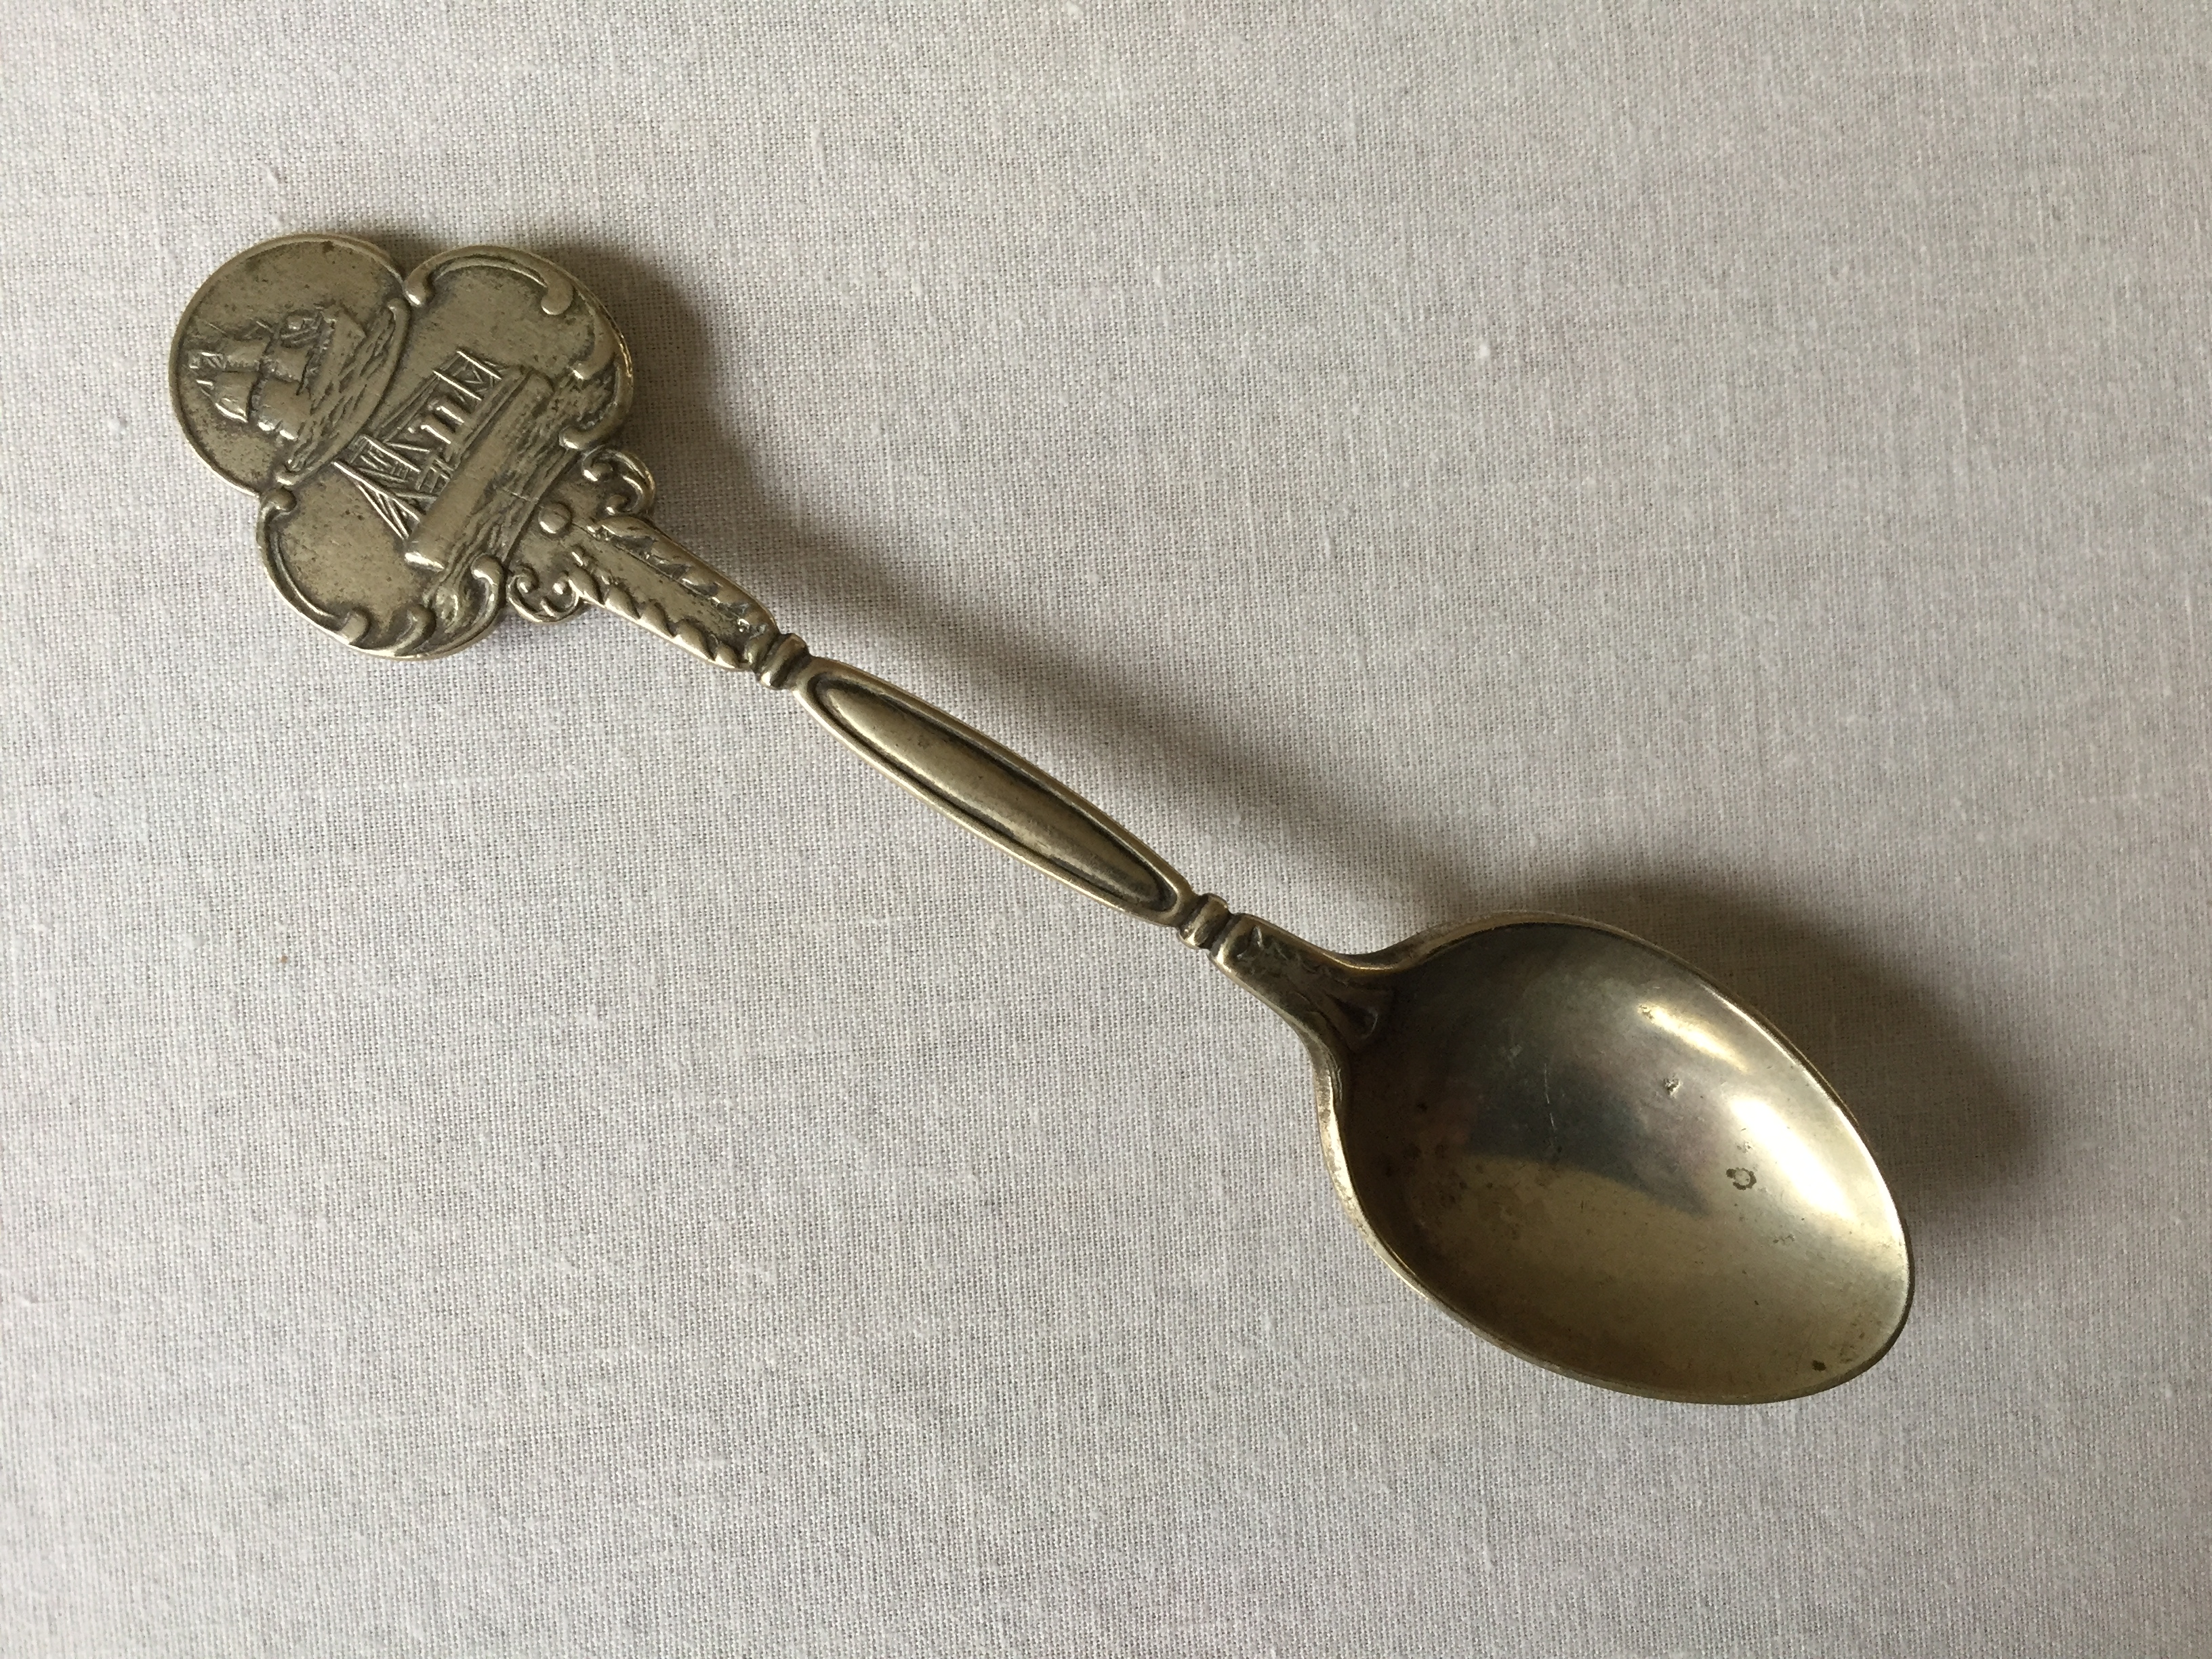 SOUVENIR SPOON FROM AN UNKNOWN SHIPPING VESSEL